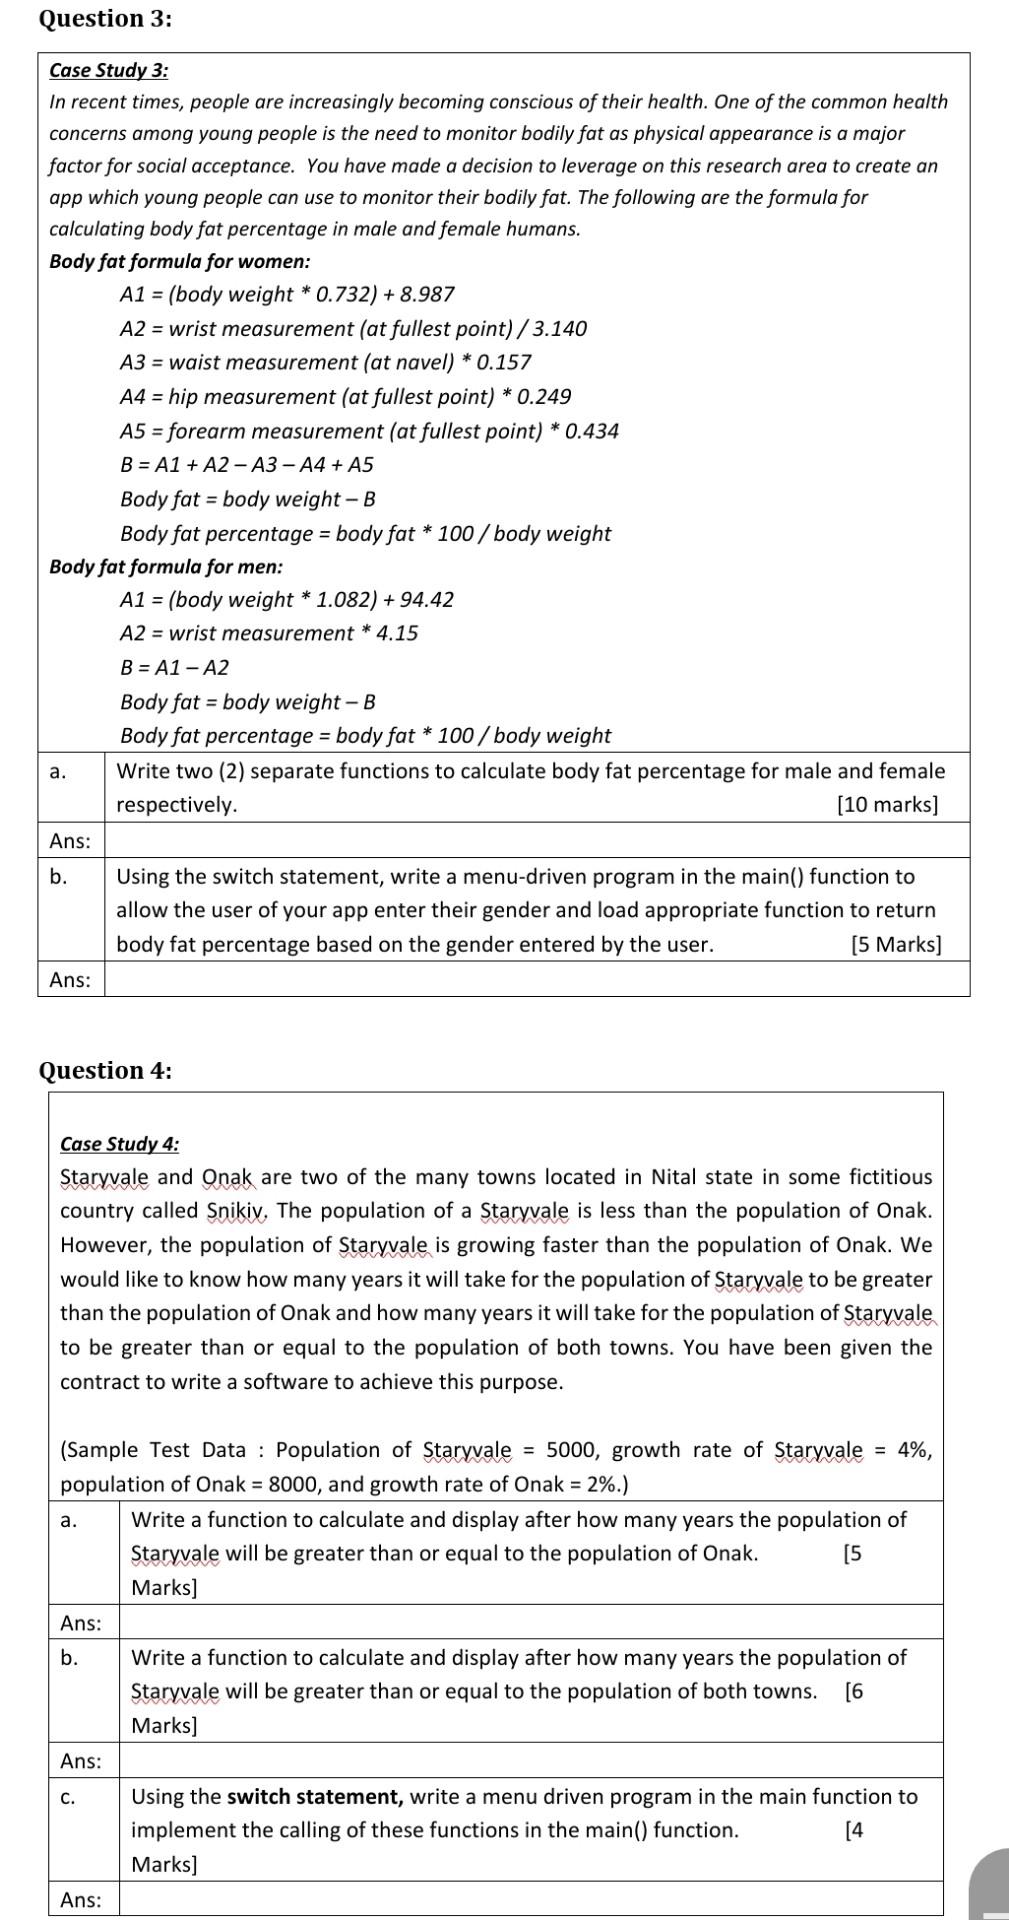 The gender-specific body composition template of females. (a) The